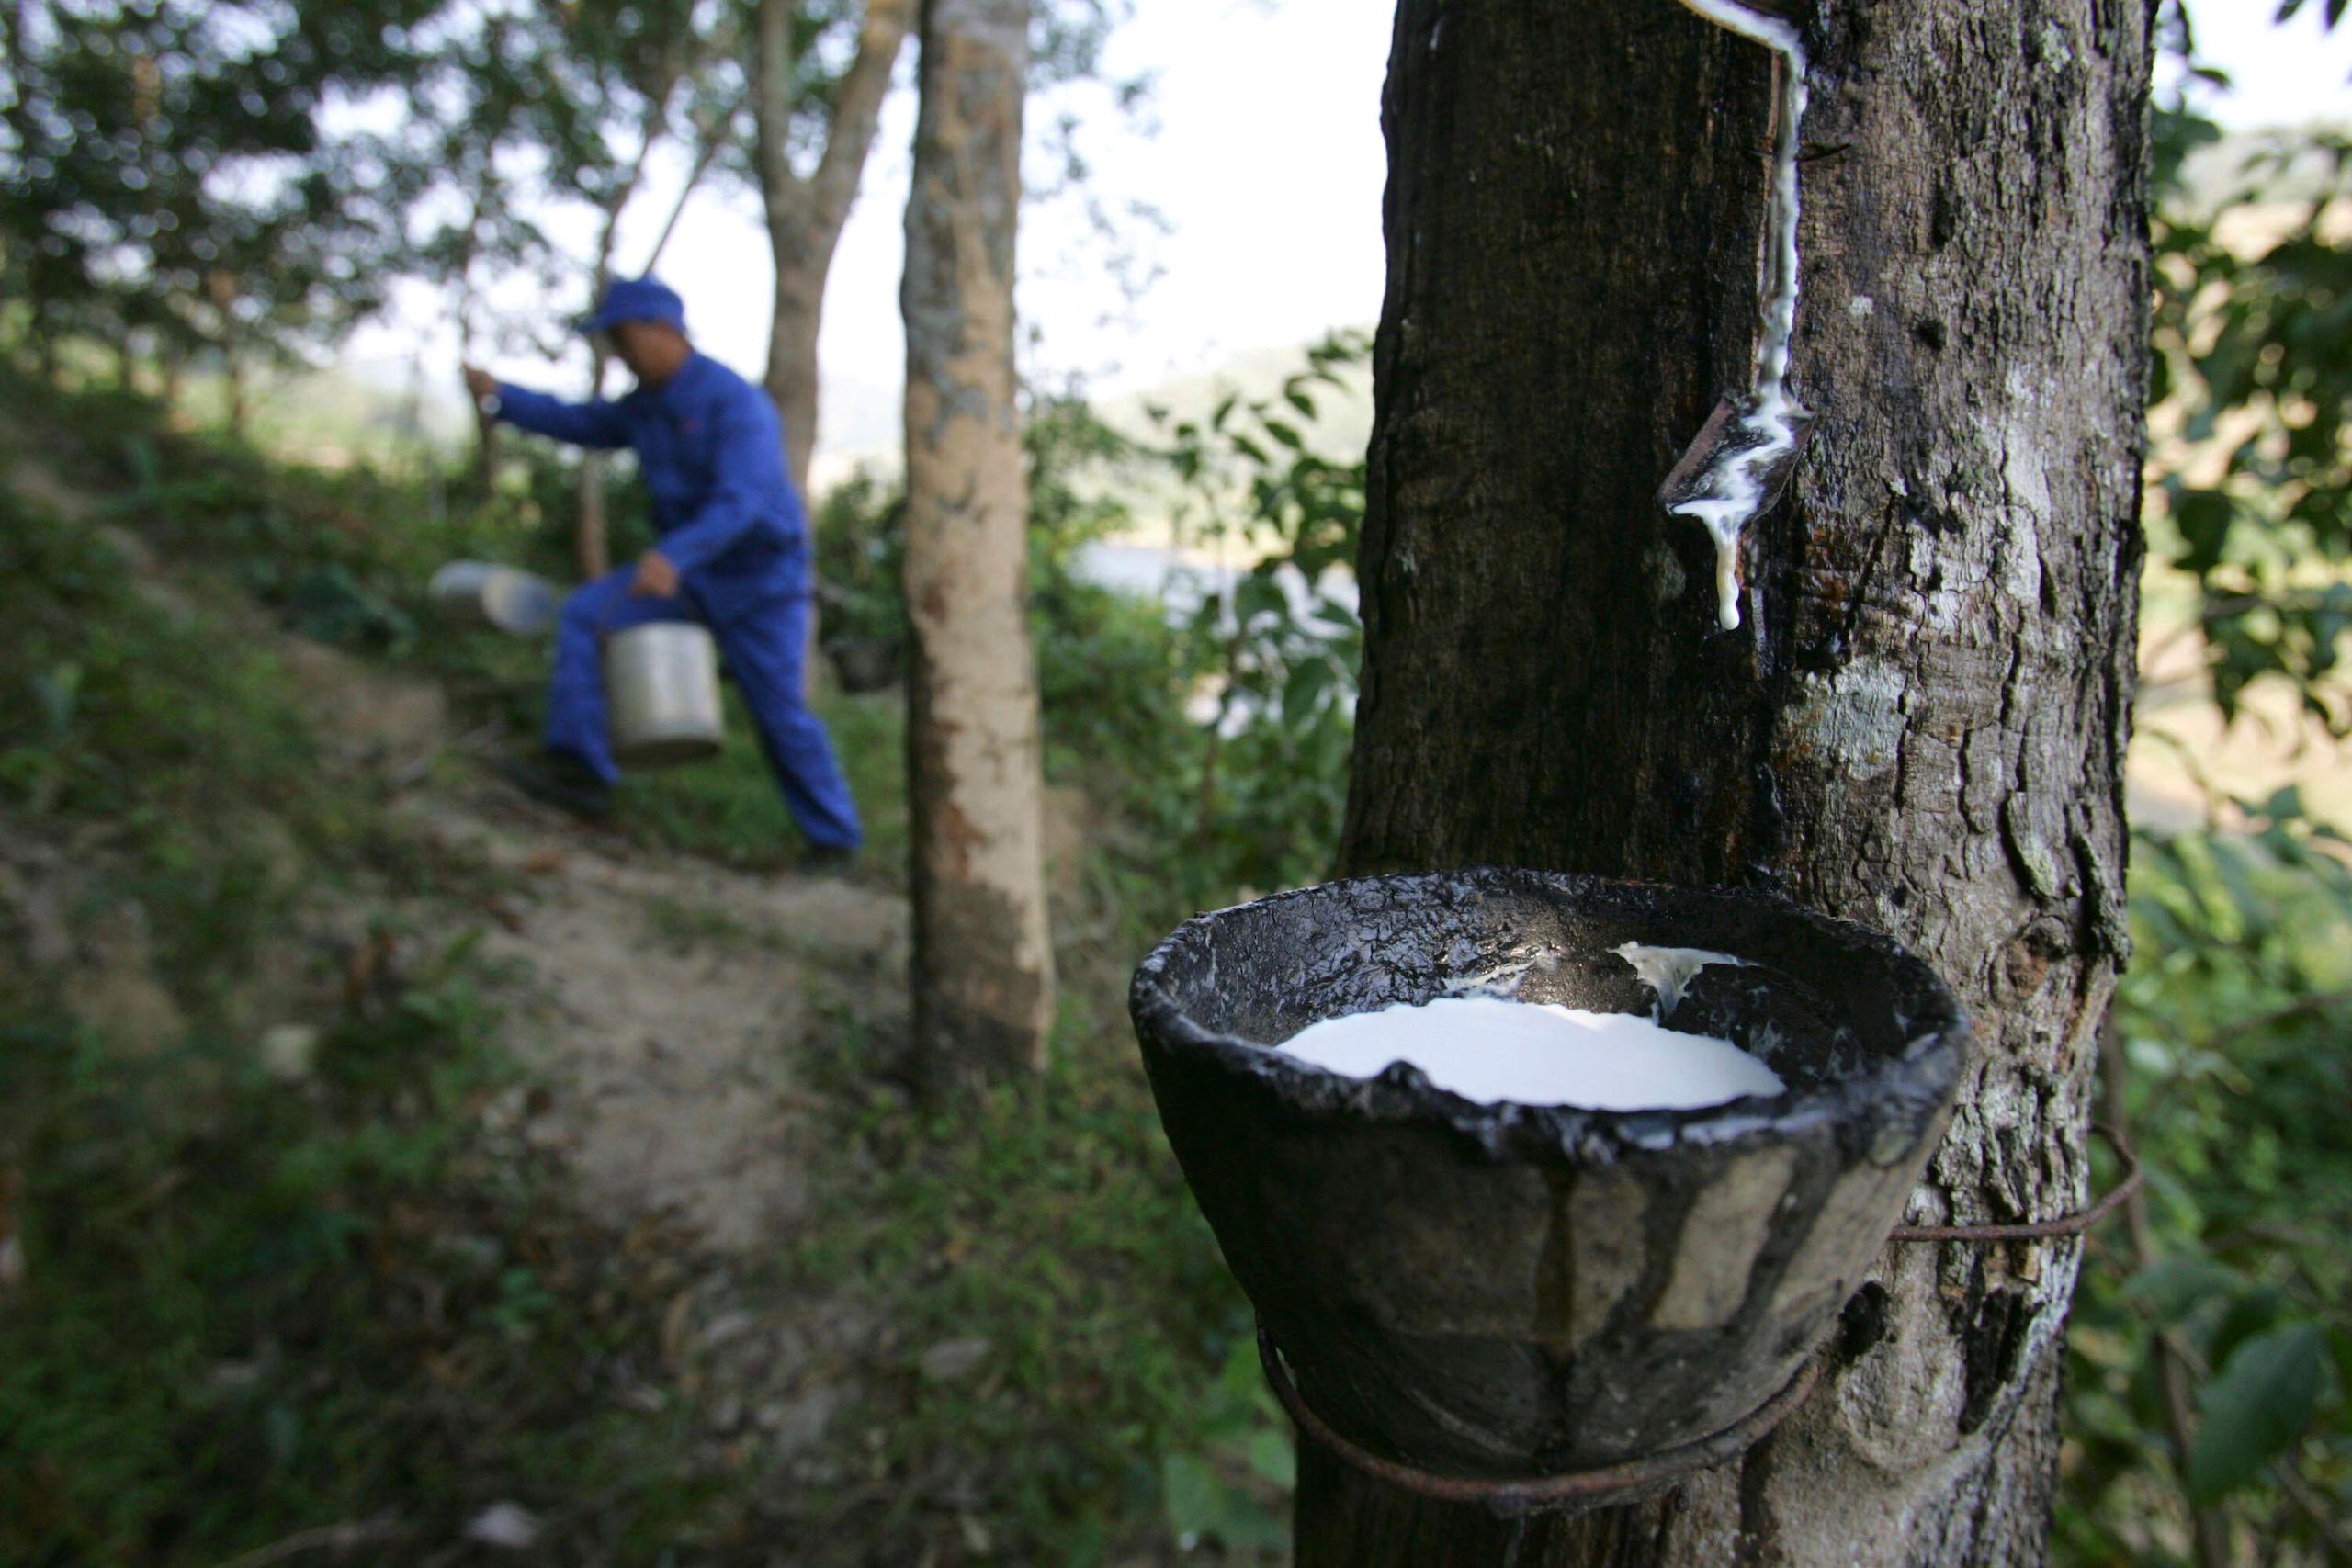 <p>A worker collects latex from a rubber tree in Sanya, in China&#8217;s Hainan province. The country is the world&#8217;s largest consumer of natural rubber. (Image: Andy Gao / Alamy)</p>